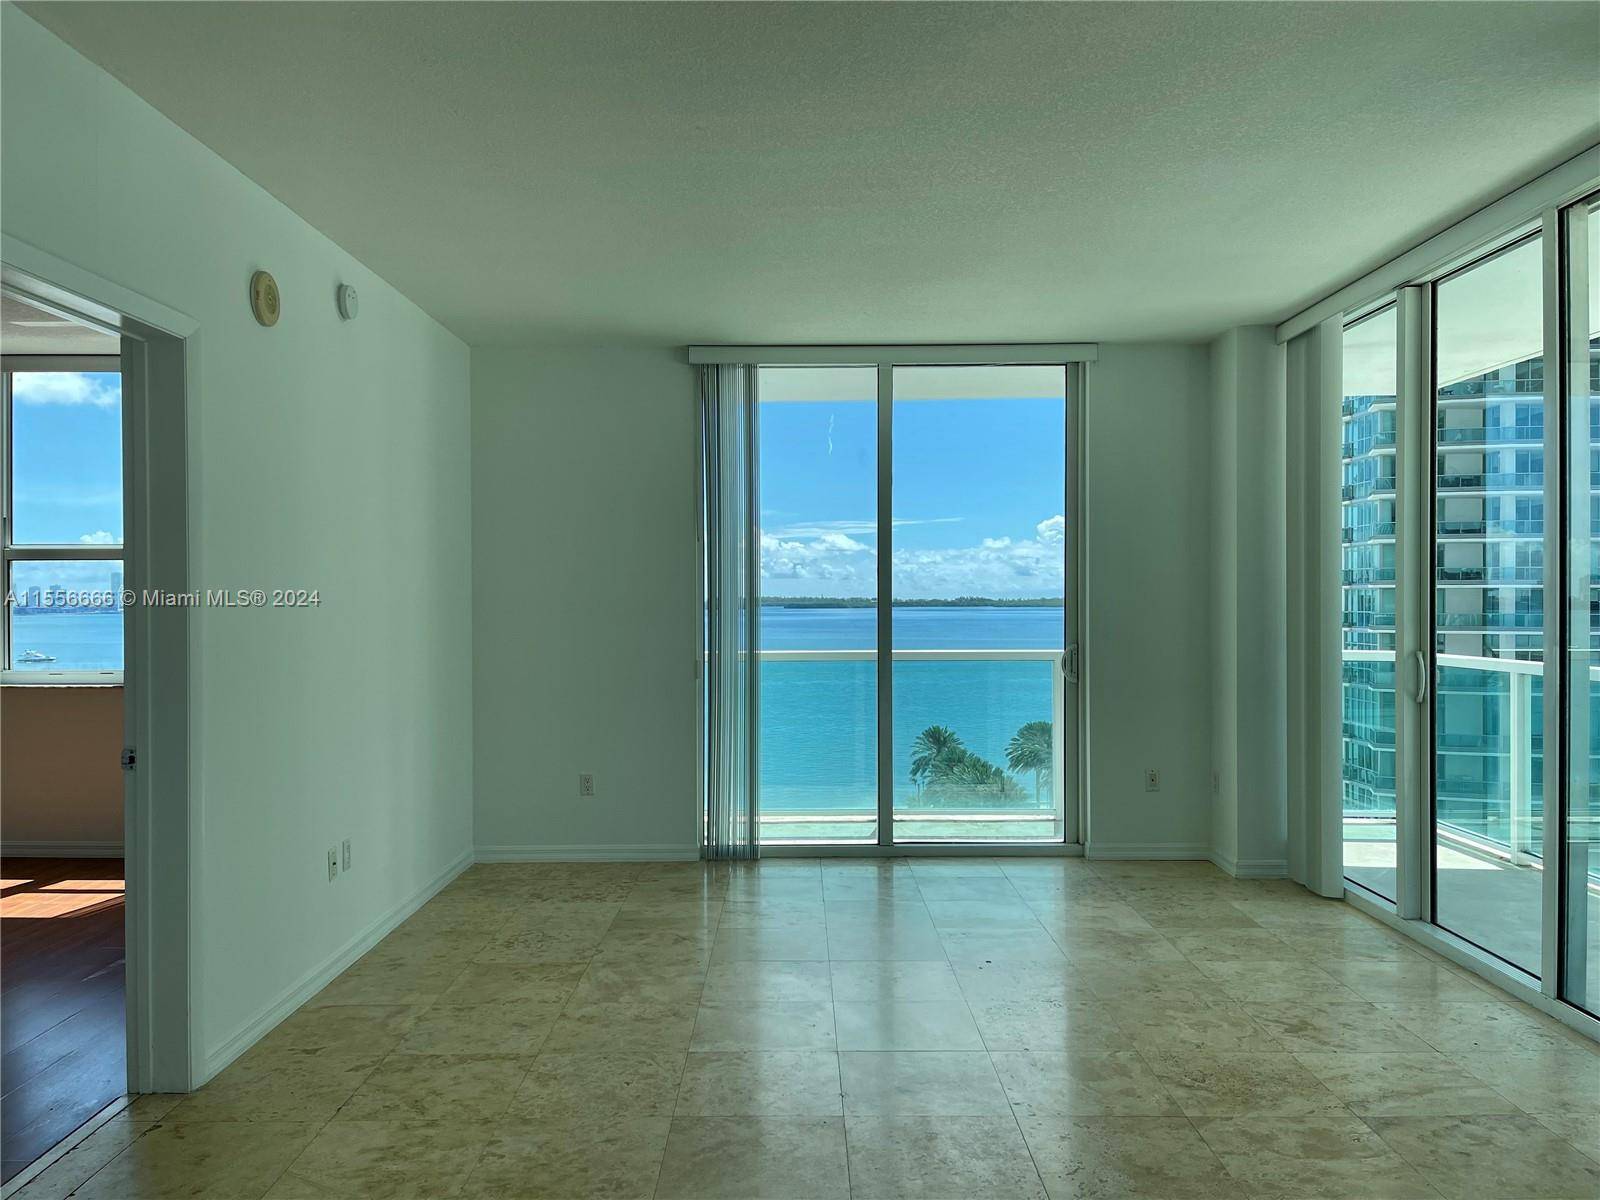 MODERN AND LUXURY APARTMENT, 2 BEDROOMS, 2 BATHROOMS WITH INCREDIBLE FRONT VIEW TO THE WATER, AND BALCONY SURROUNDING THE APARTMENT, IN BEDROOMS WOOD FLOOR AND LIVING ROOM, DINING ROOM, AND ...